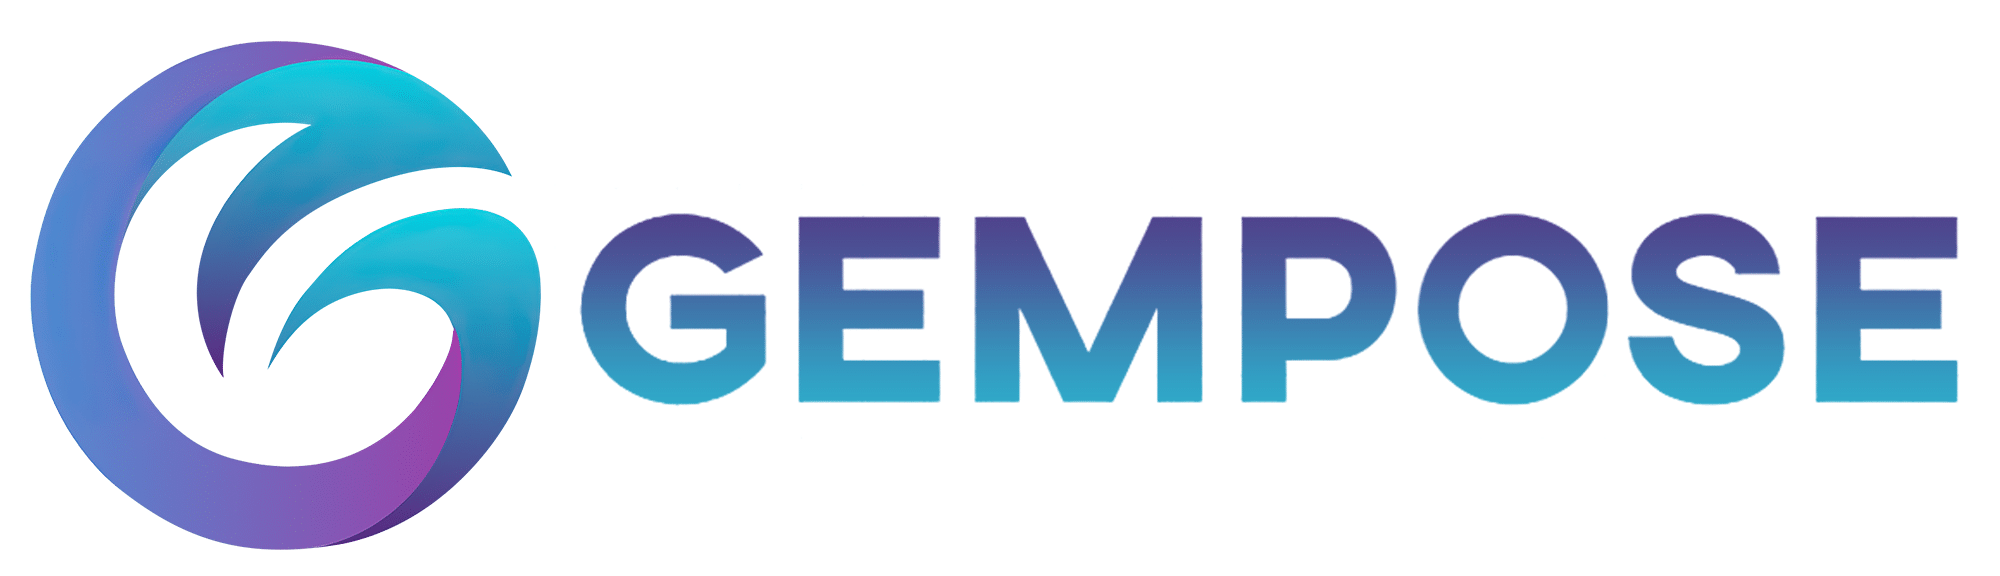 Gempose - A higher form of shopping.